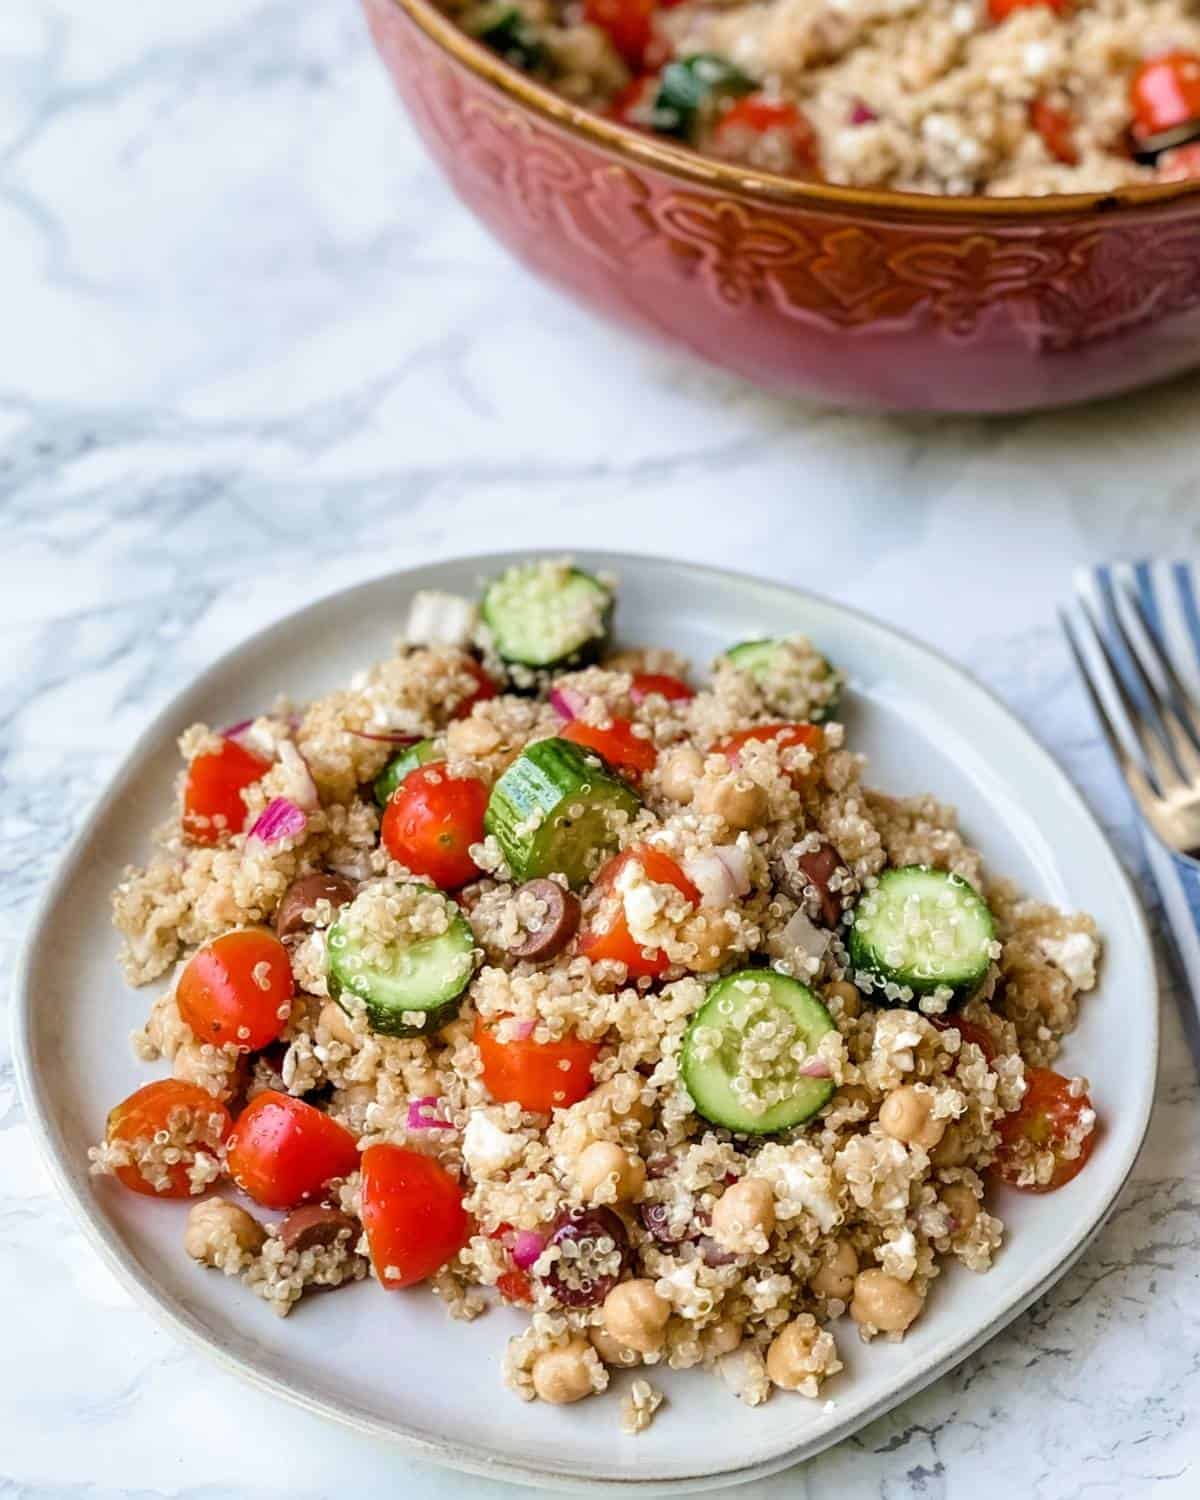 a plate of quinoa salad with feta and olives and vegetables next to a large salad bowl